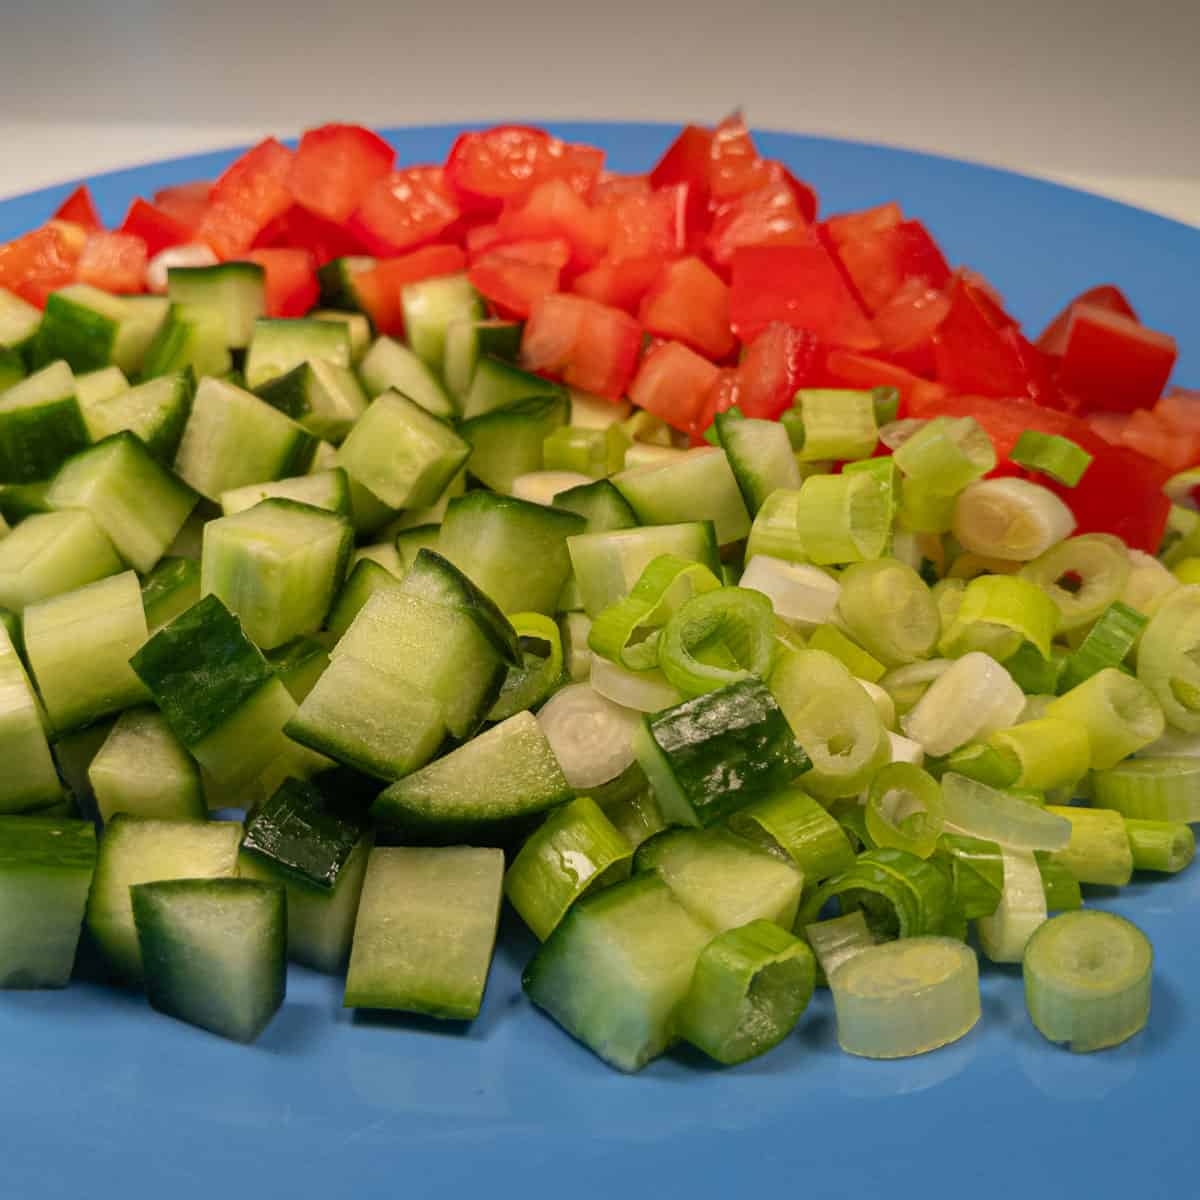 Diced cucumber, scallions, and tomatoes on a plate.